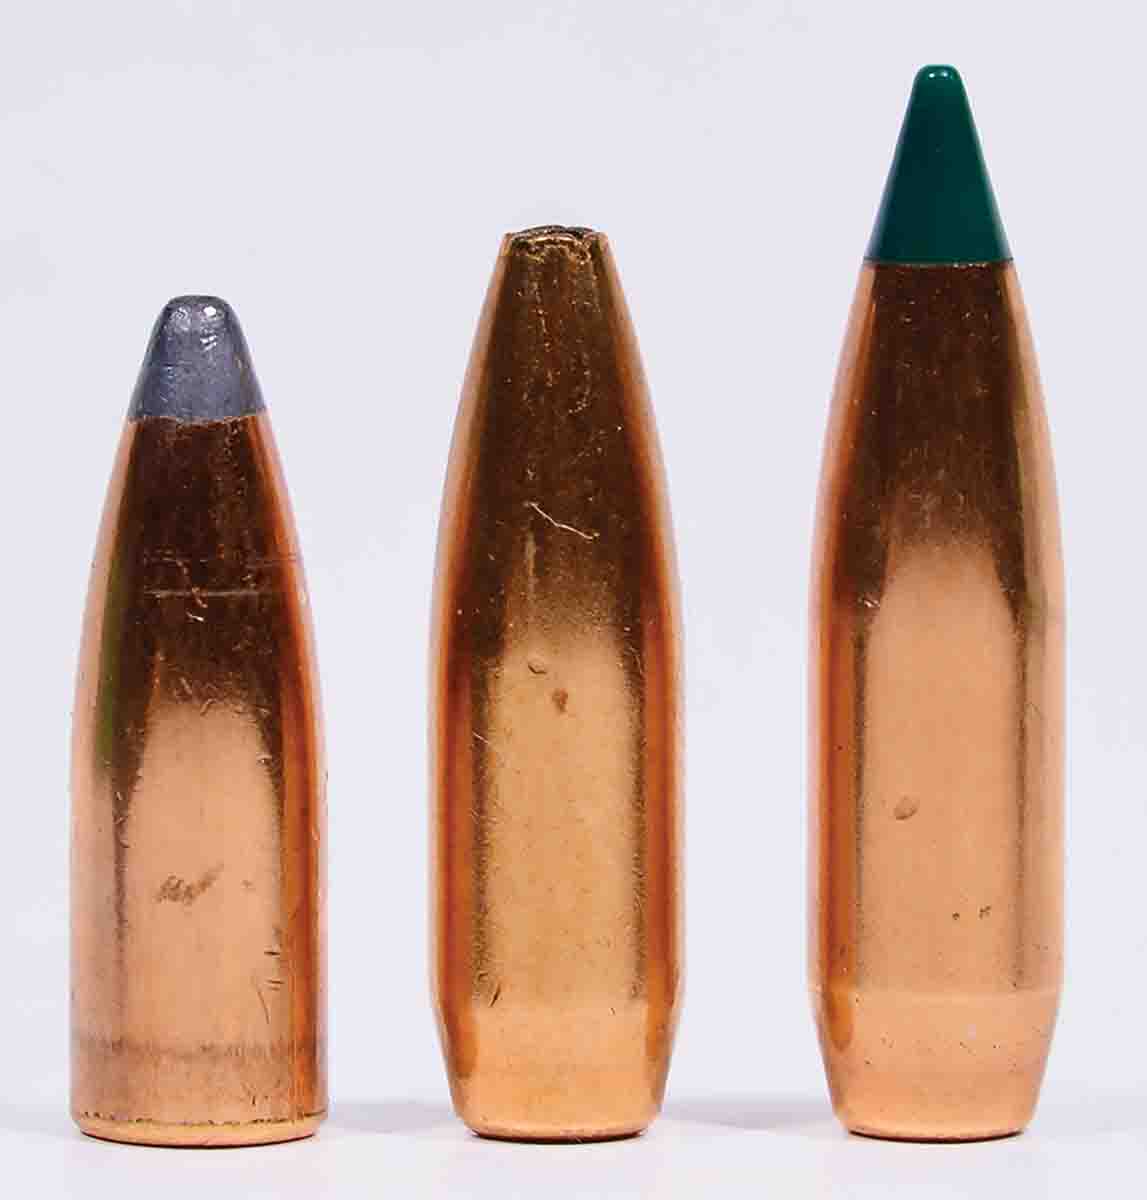 Bullet length is critical to achieving sufficient velocity in the .250-3000 to stabilize the bullet in its 1:14 rifling twist (left to right): the Speer Hot-Cor 87-grain, Sierra 90-grain HPBT and Sierra 90-grain BlitzKing. Both the Speer and the HPBT are recommended for medium game, while the BlitzKing is not only a varmint bullet, its length would encroach on powder capacity too much to attain the necessary velocity.